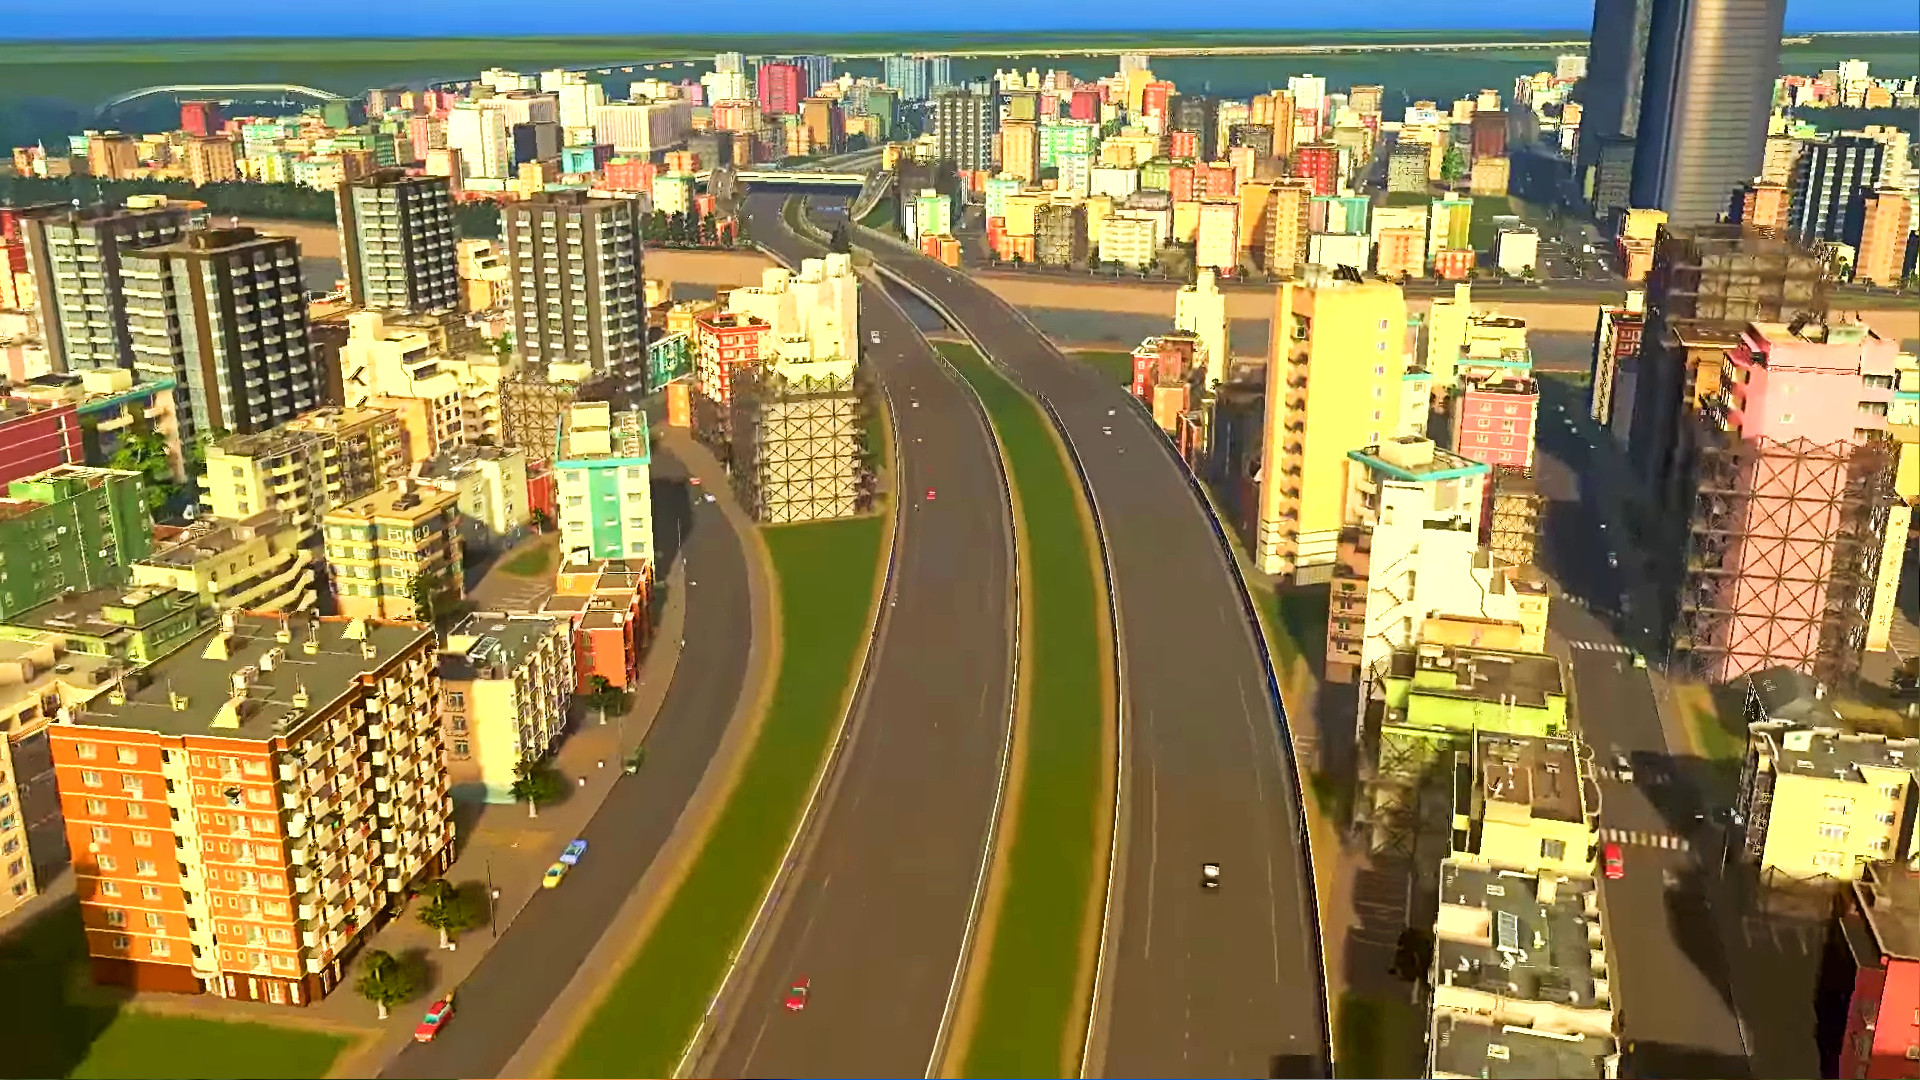 Cities Skylines - a bustling cityscape in the Paradox Interactive city-building game